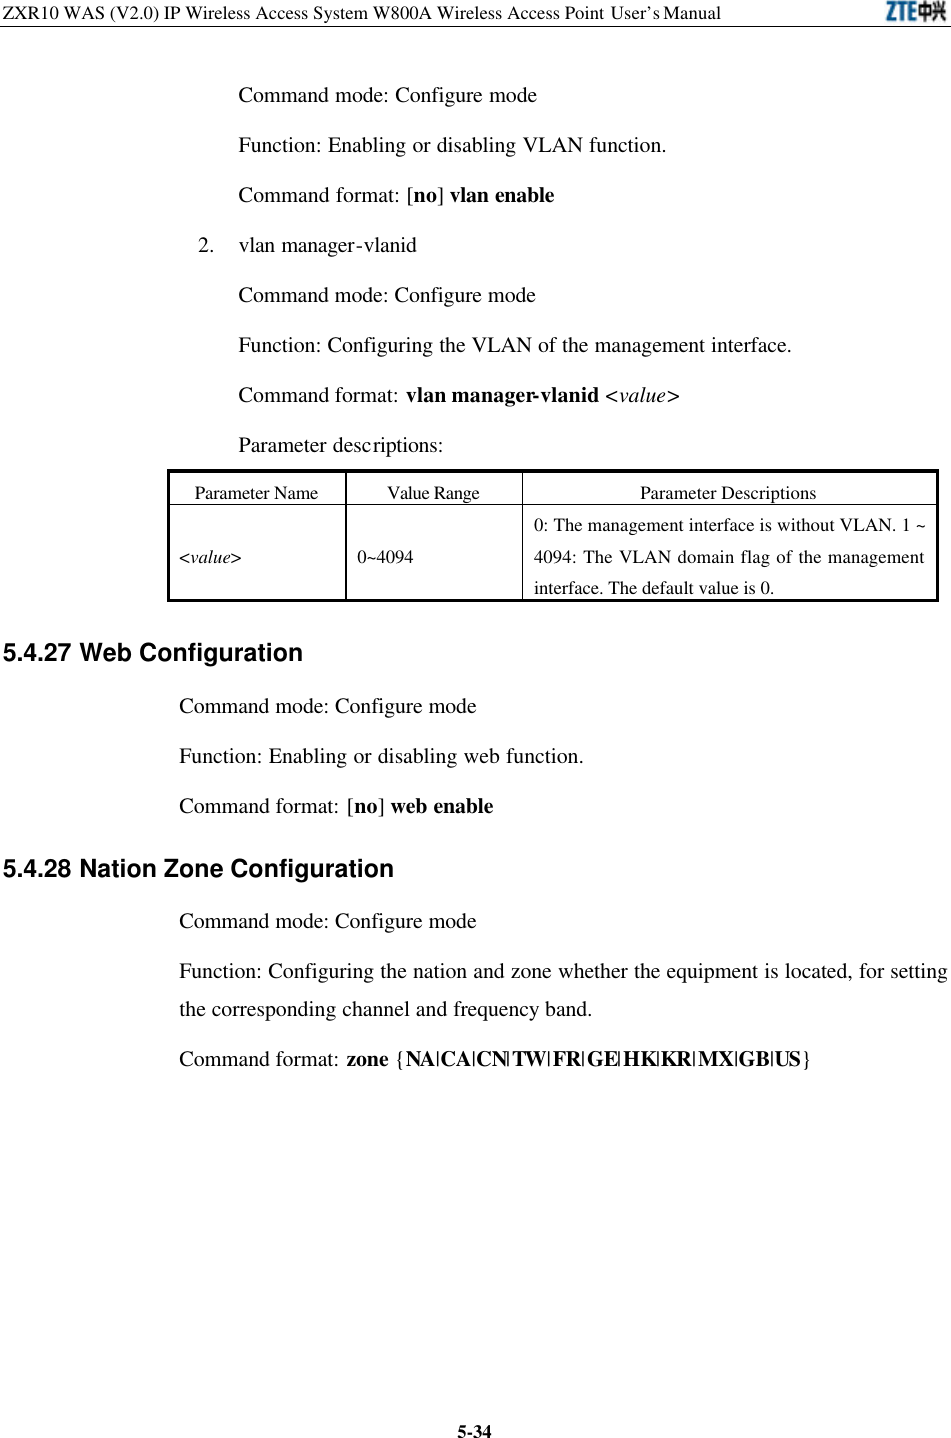 ZXR10 WAS (V2.0) IP Wireless Access System W800A Wireless Access Point User’s Manual  5-34Command mode: Configure mode   Function: Enabling or disabling VLAN function.   Command format: [no] vlan enable 2. vlan manager-vlanid   Command mode: Configure mode   Function: Configuring the VLAN of the management interface.   Command format: vlan manager-vlanid &lt;value&gt; Parameter descriptions:   Parameter Name Value Range Parameter Descriptions &lt;value&gt; 0~4094 0: The management interface is without VLAN. 1 ~ 4094: The VLAN domain flag of the management interface. The default value is 0.   5.4.27 Web Configuration   Command mode: Configure mode   Function: Enabling or disabling web function.   Command format: [no] web enable 5.4.28 Nation Zone Configuration   Command mode: Configure mode   Function: Configuring the nation and zone whether the equipment is located, for setting the corresponding channel and frequency band.   Command format: zone {NA|CA|CN|TW|FR|GE|HK|KR|MX|GB|US} 